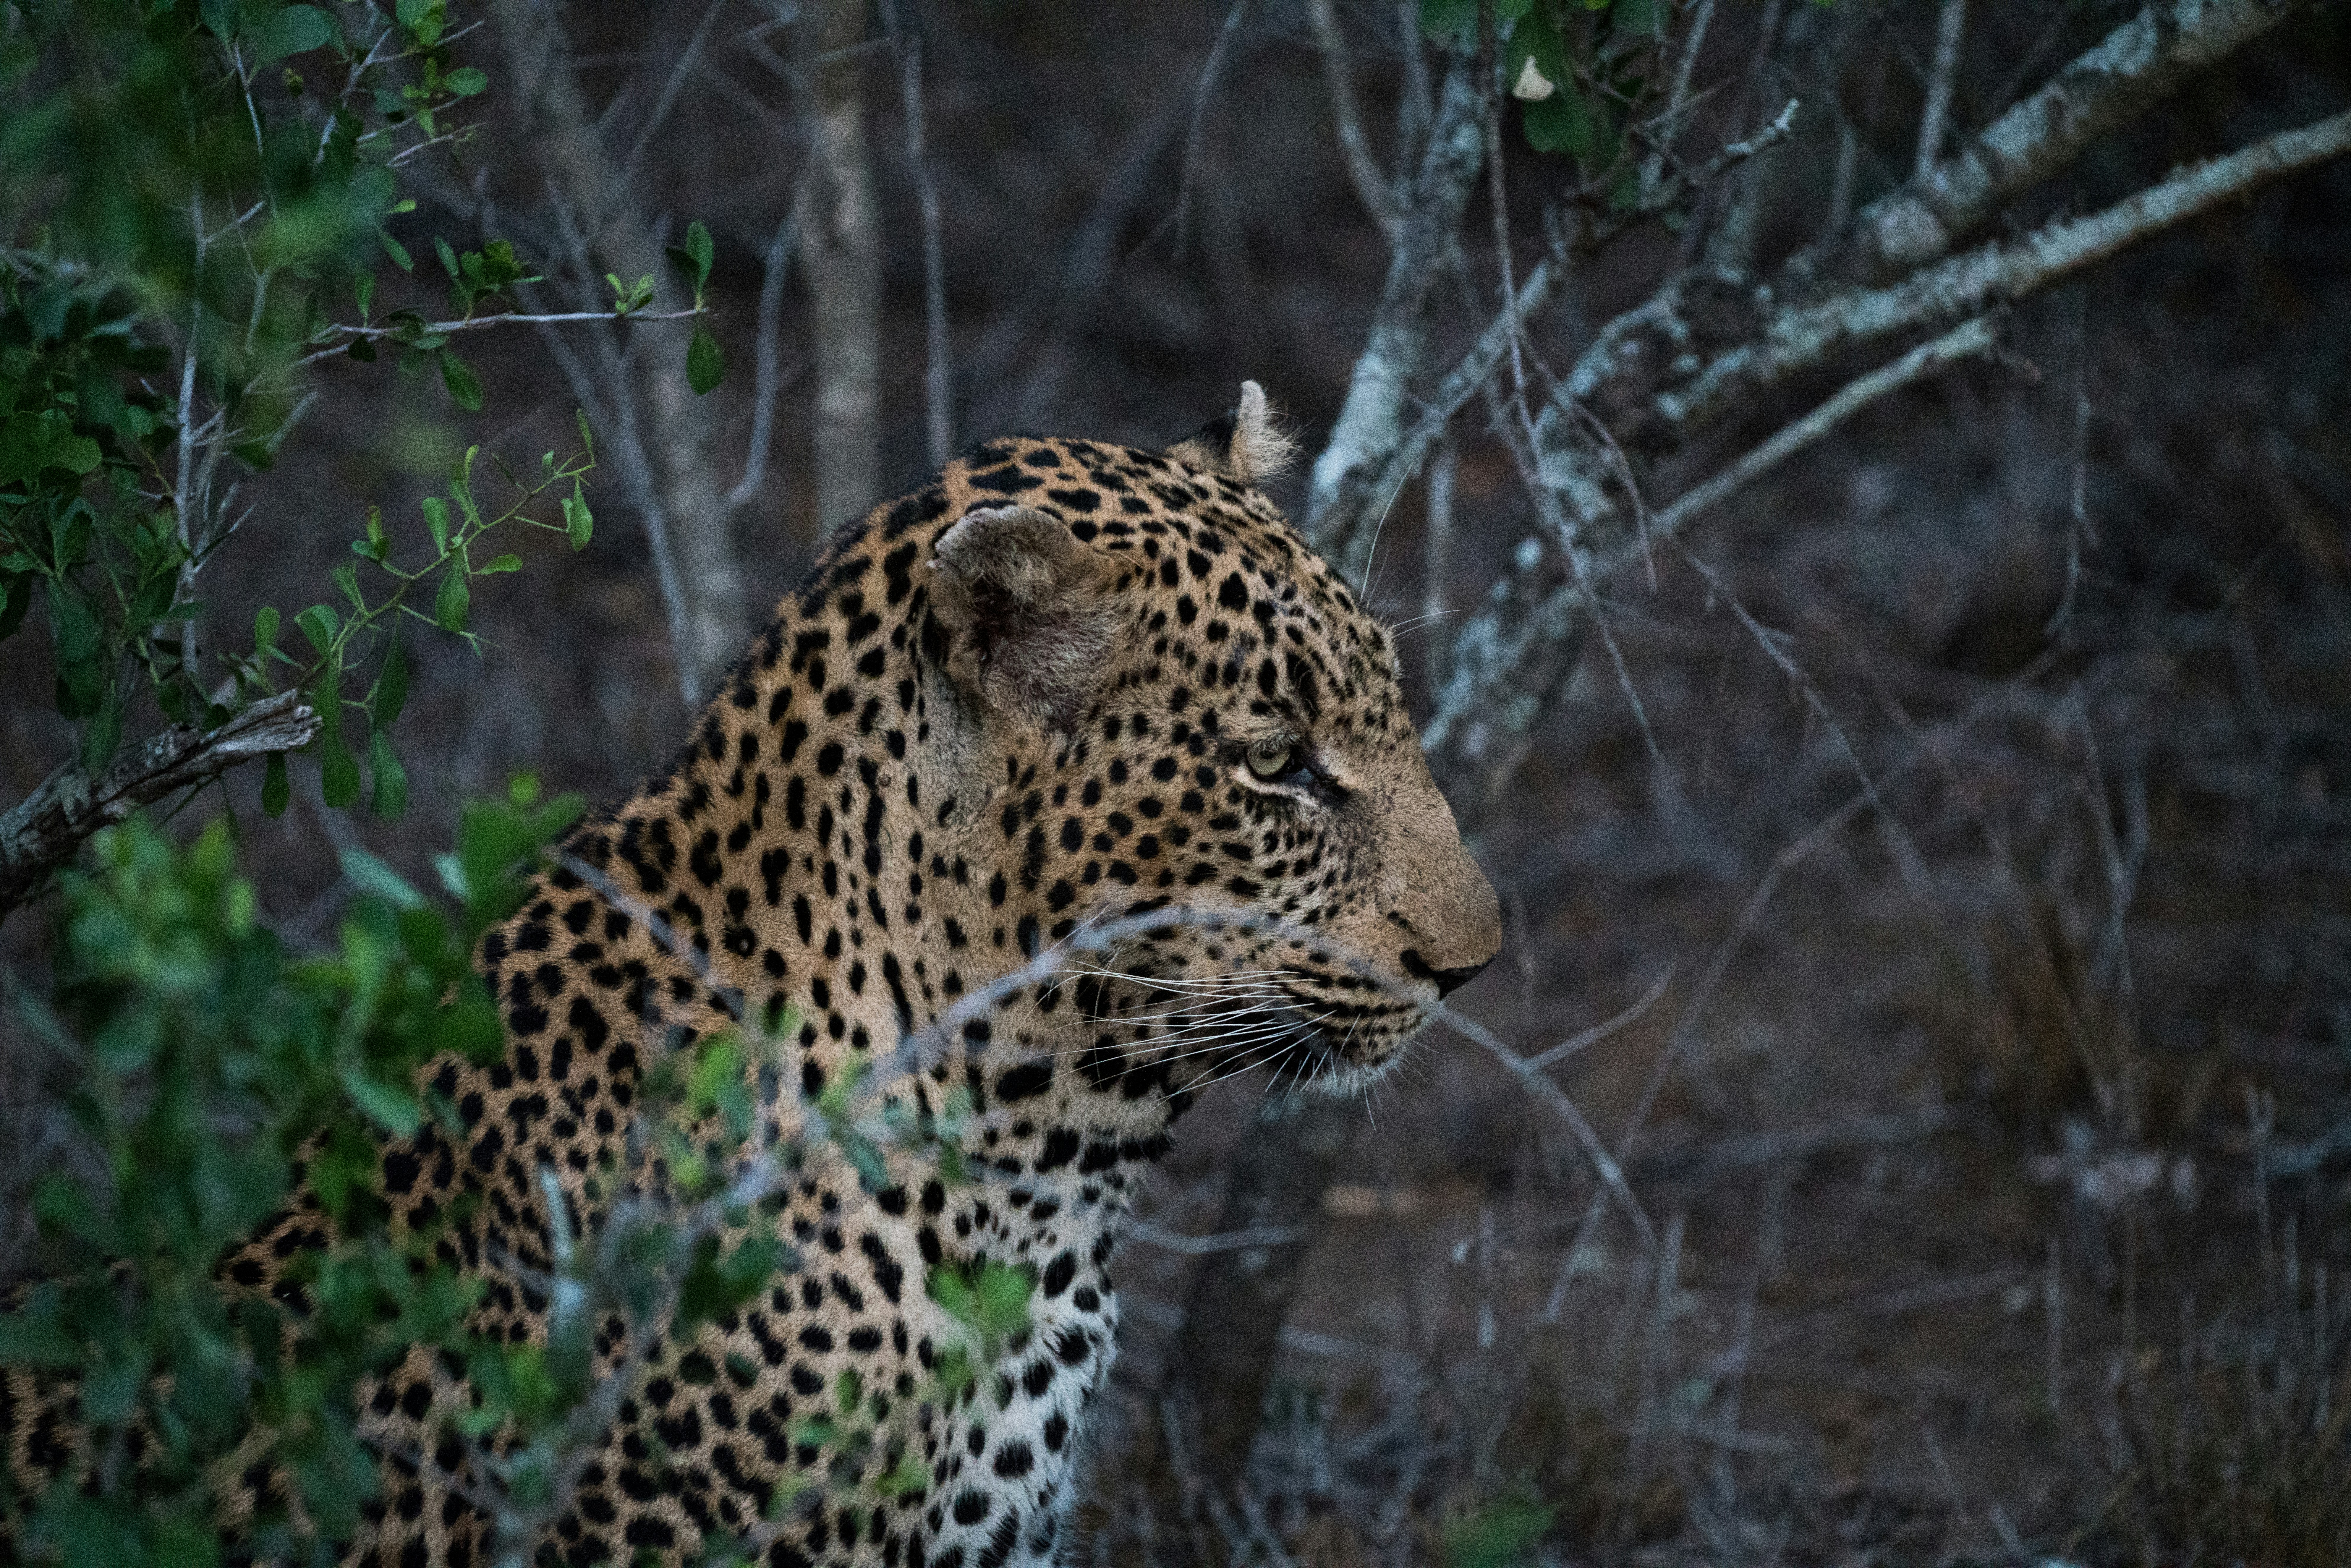 Just before night fall we came across this Leopard tucked away in a small clearing of bushes. It sat momentarily even with our arrival and didn’t move until it got up to walk away.